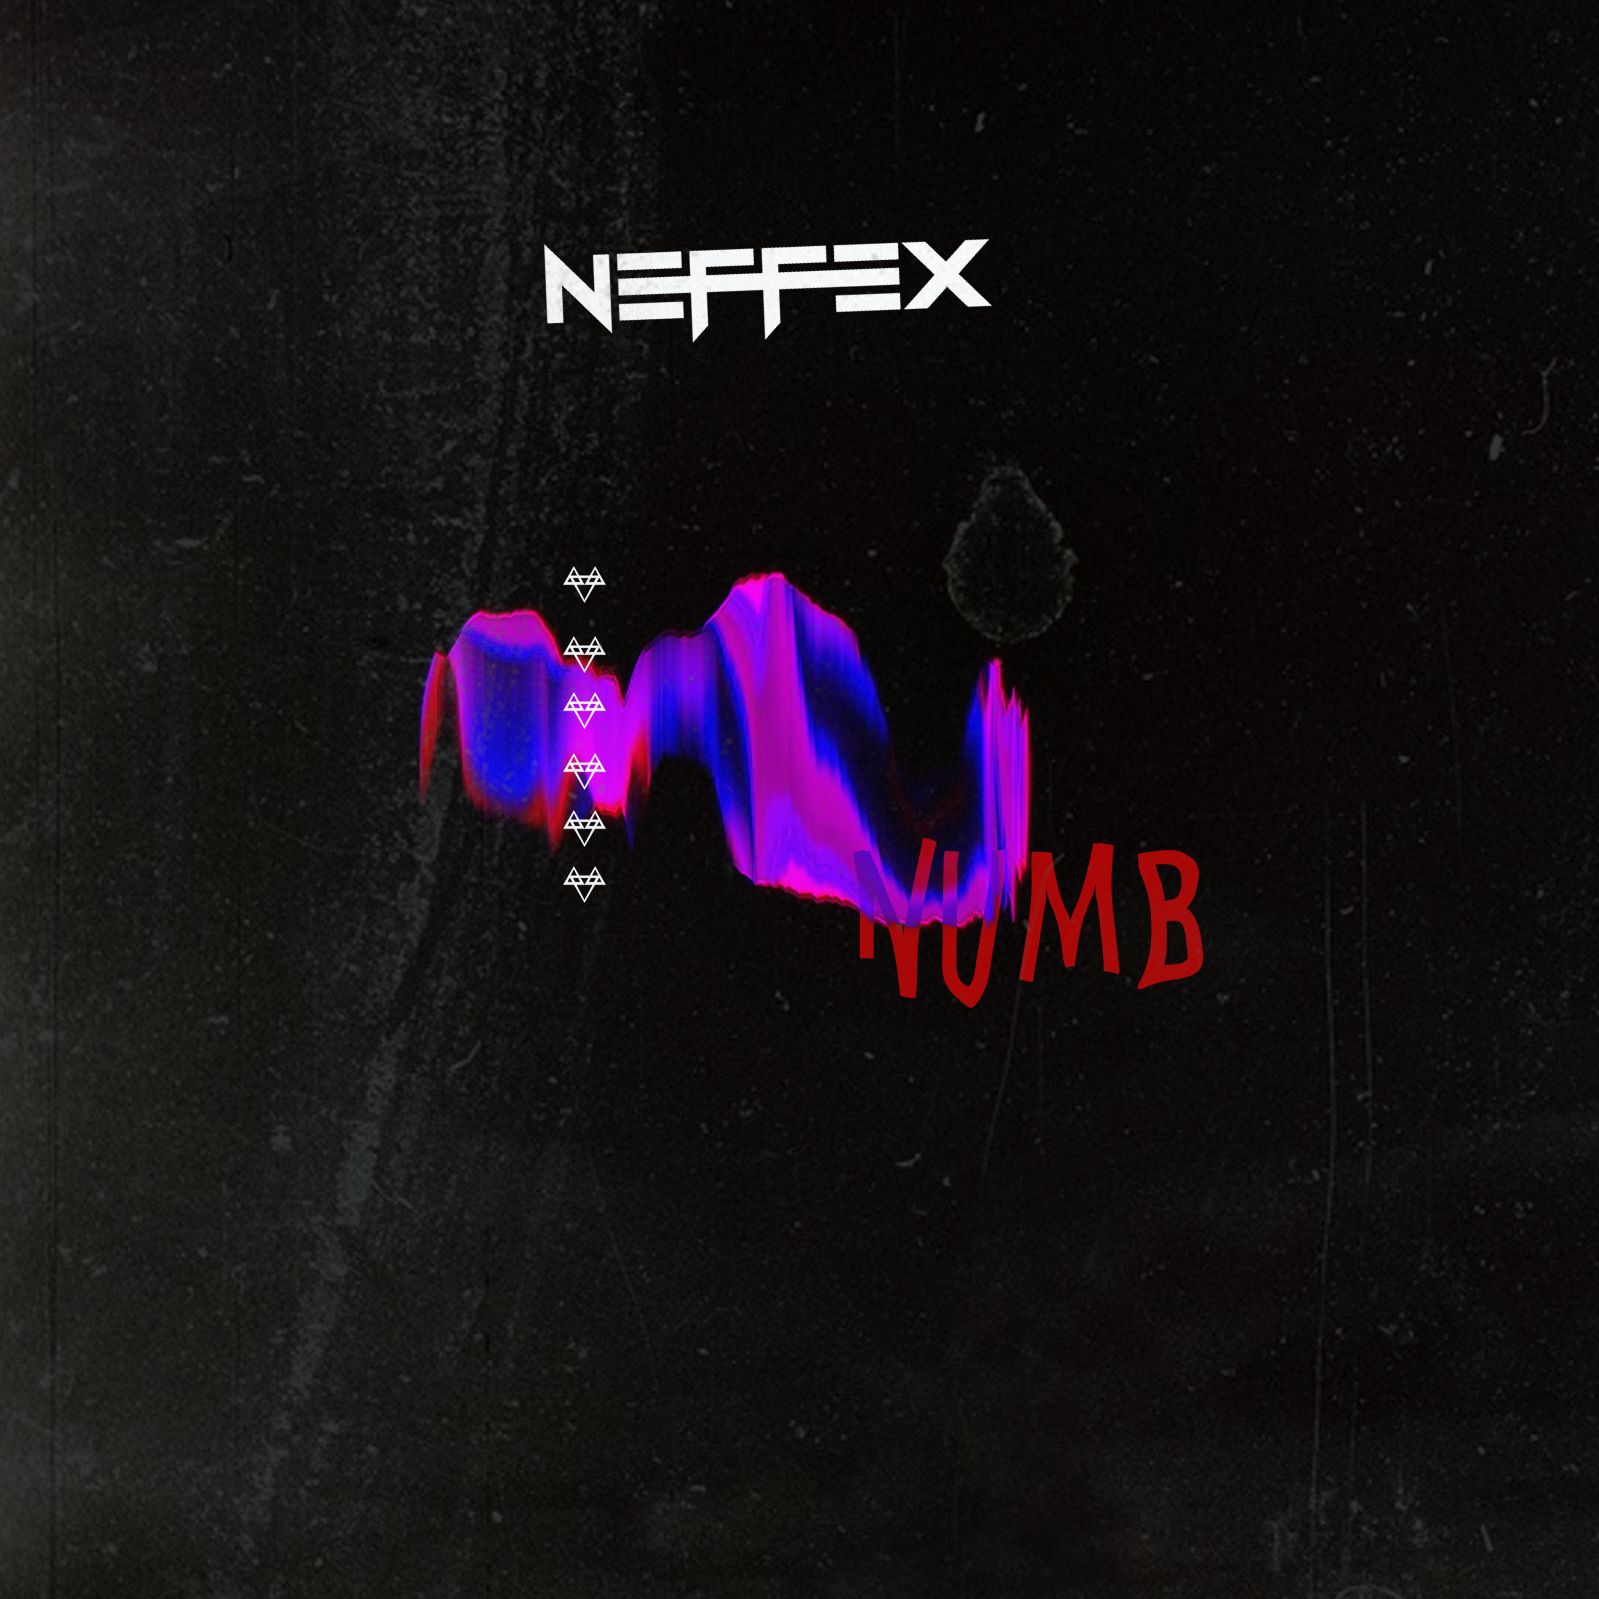 Download Numb [Copyright Free] by NEFFEX